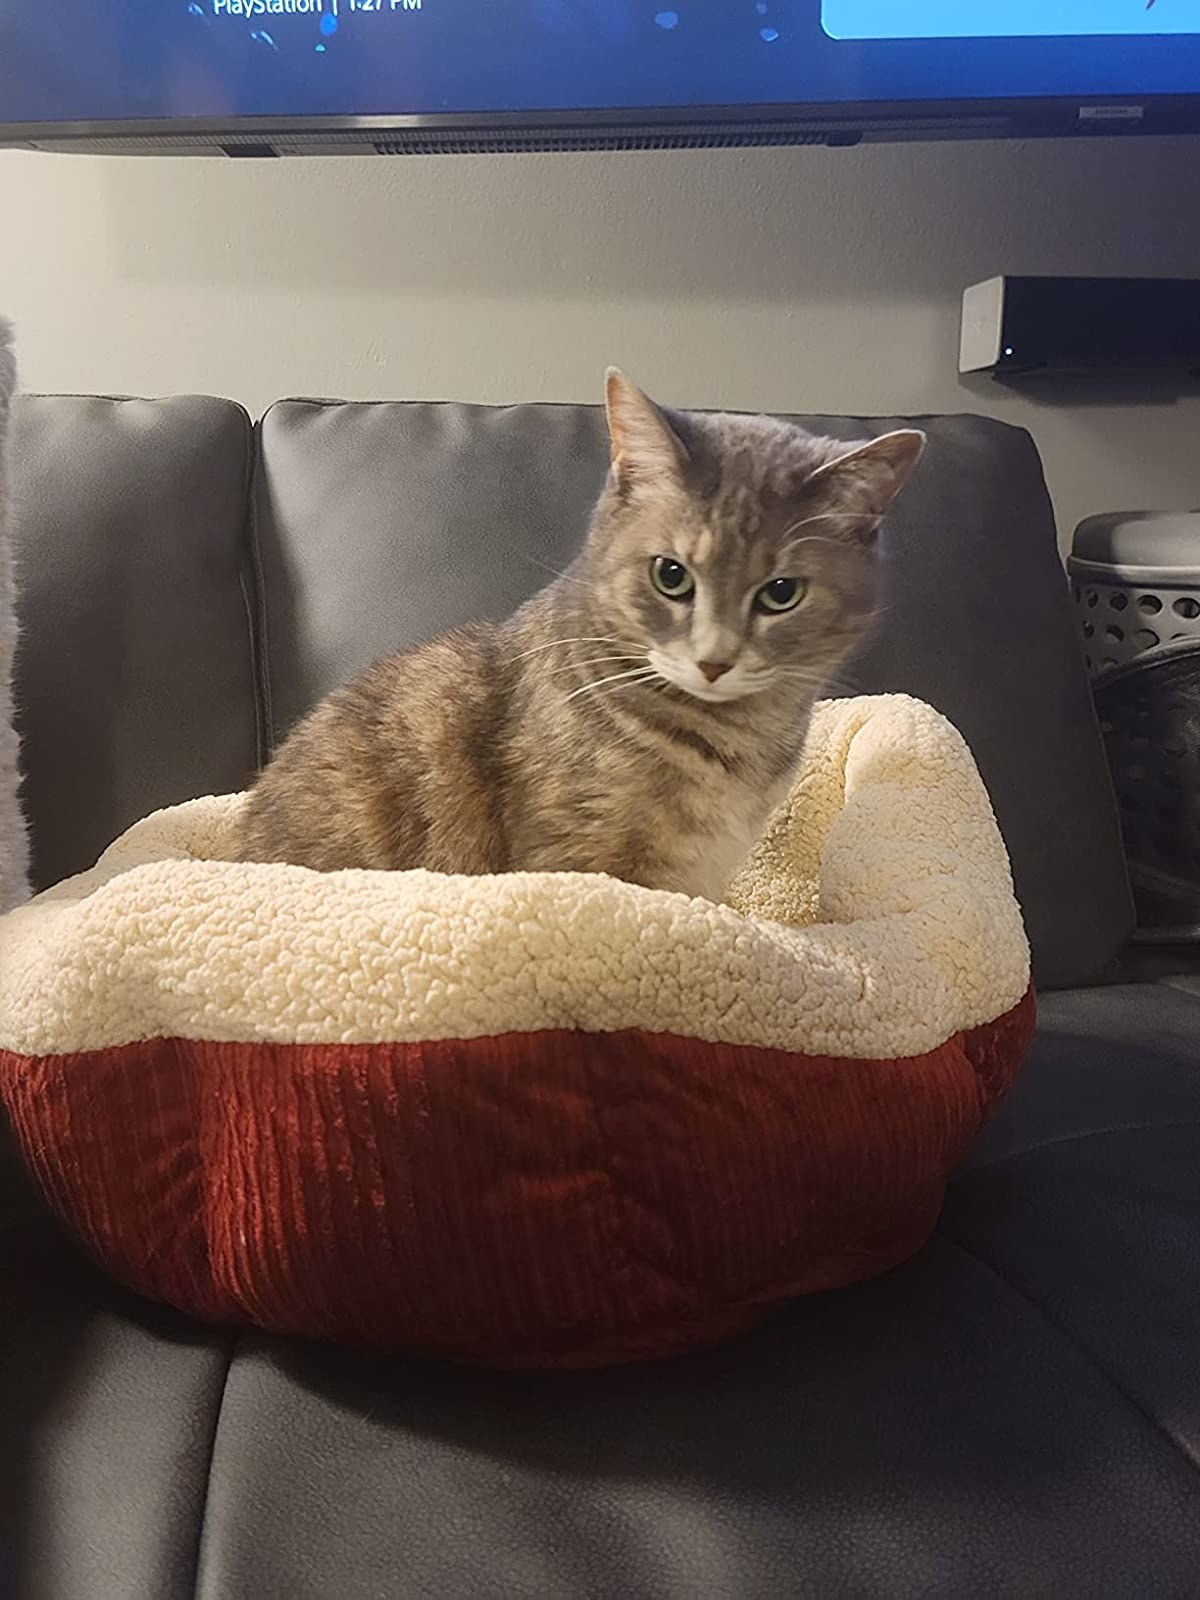 Gray cat in red and white pet bed